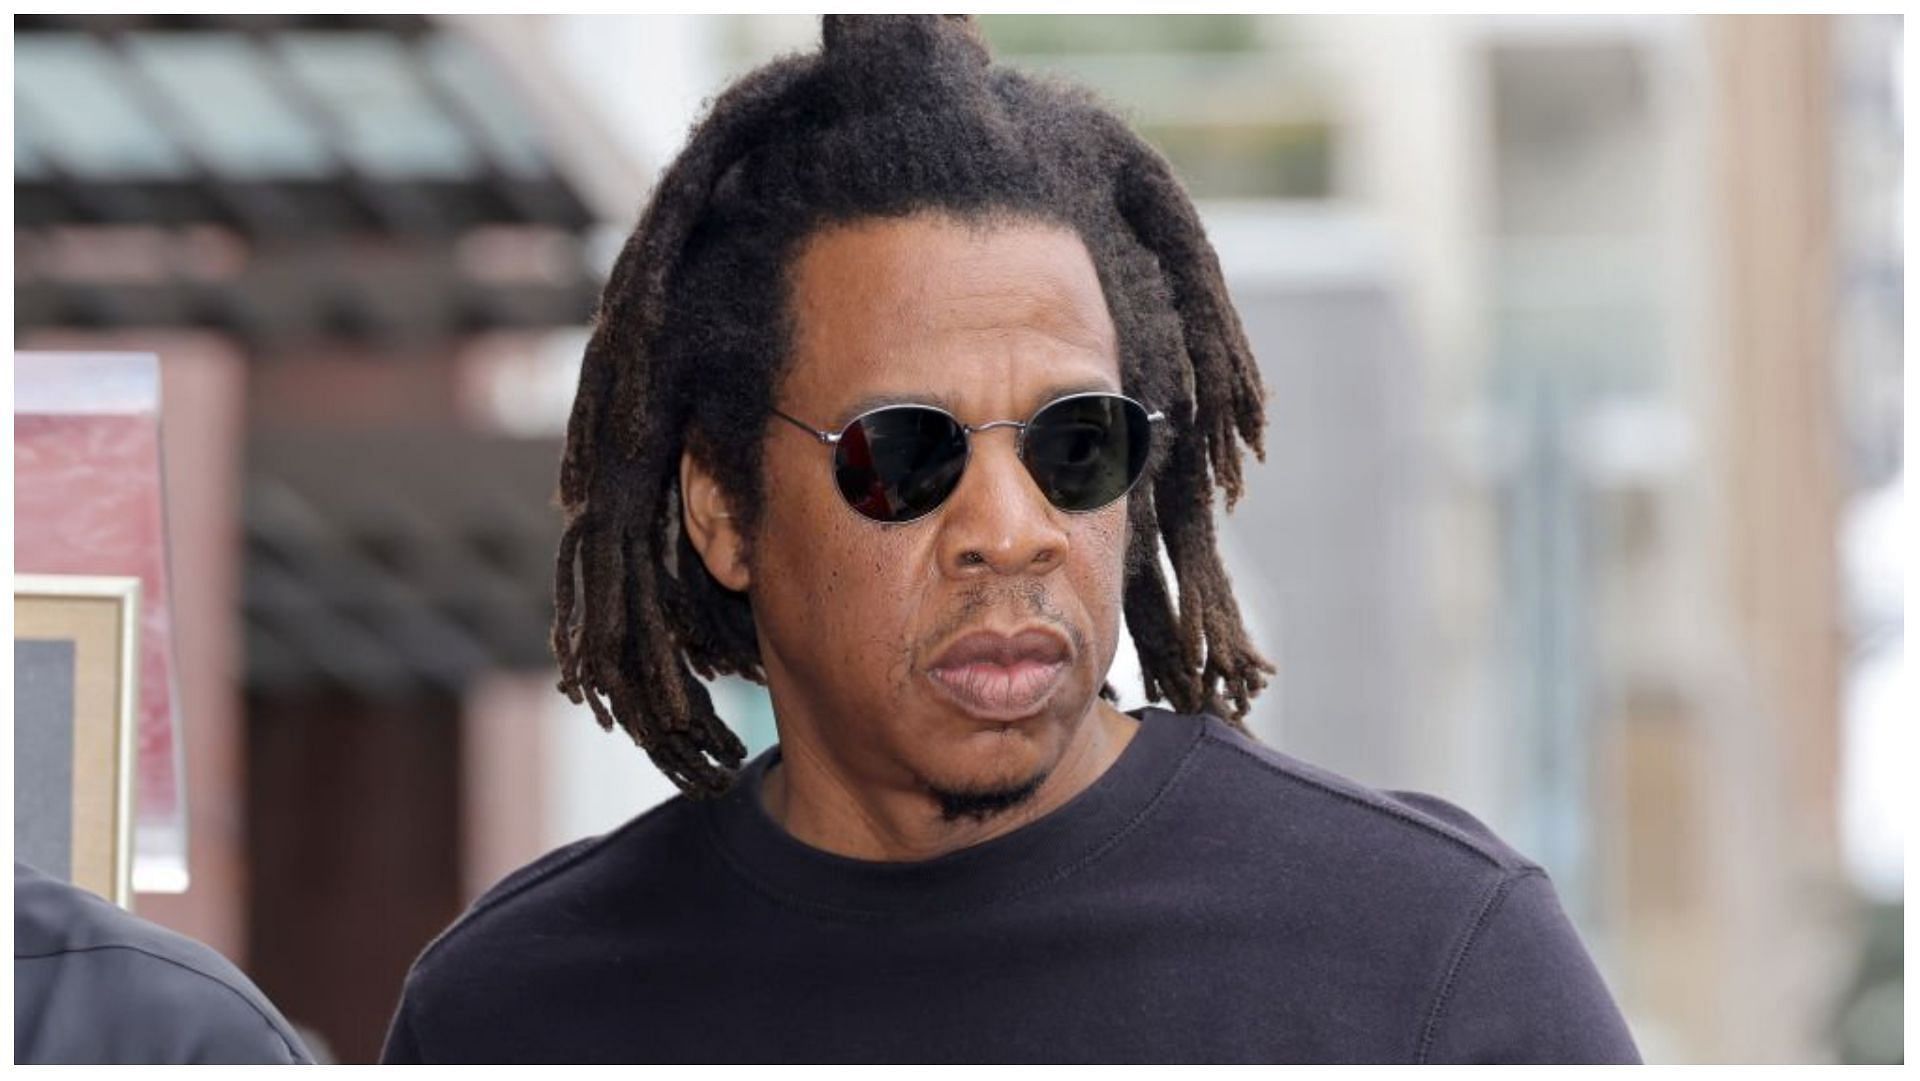 Jay-Z was slammed for comparing the word capitalist to the N-word (Image via Kevin Winter/Getty Images)